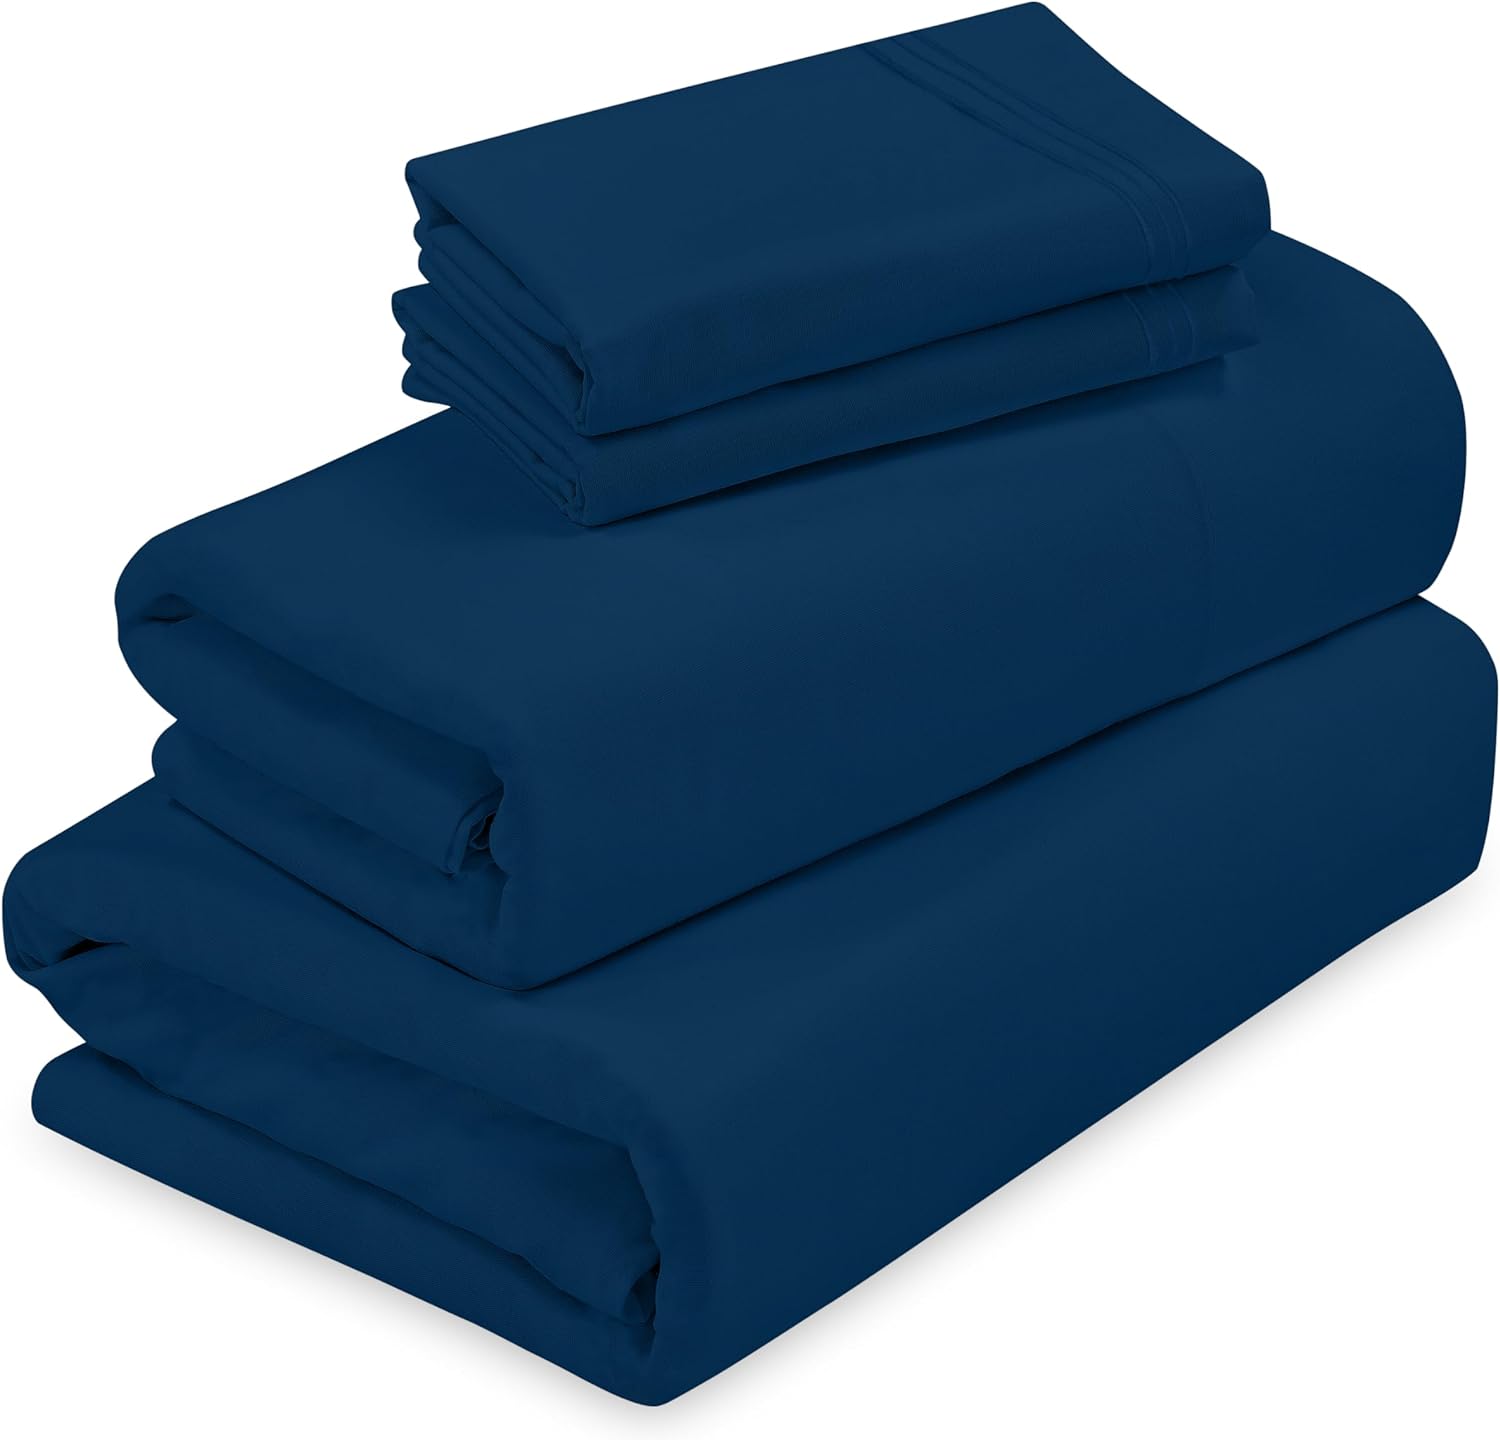 ROYALE LINENS - 4 Piece California King Bed Sheet - Brushed Microfiber 1800 Bedding - 1 Fitted Sheet, 1 Flat Sheet, 2 Pillow Case - Wrinkle & Fade Resistant Cal King Size Sheet Set (Kingcal, Navy)